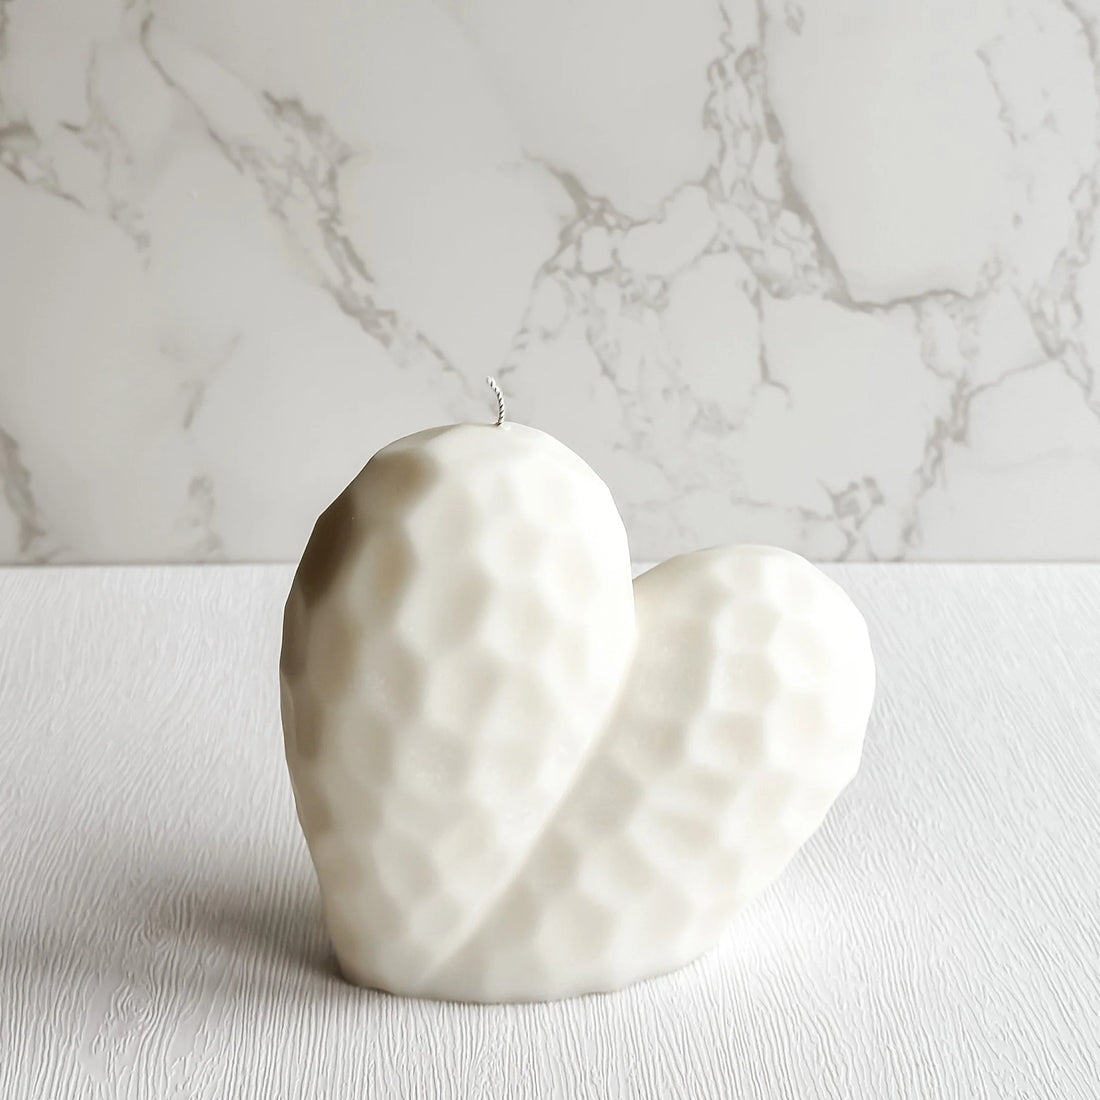 Sinking Heart Soy Wax Decorative Candle